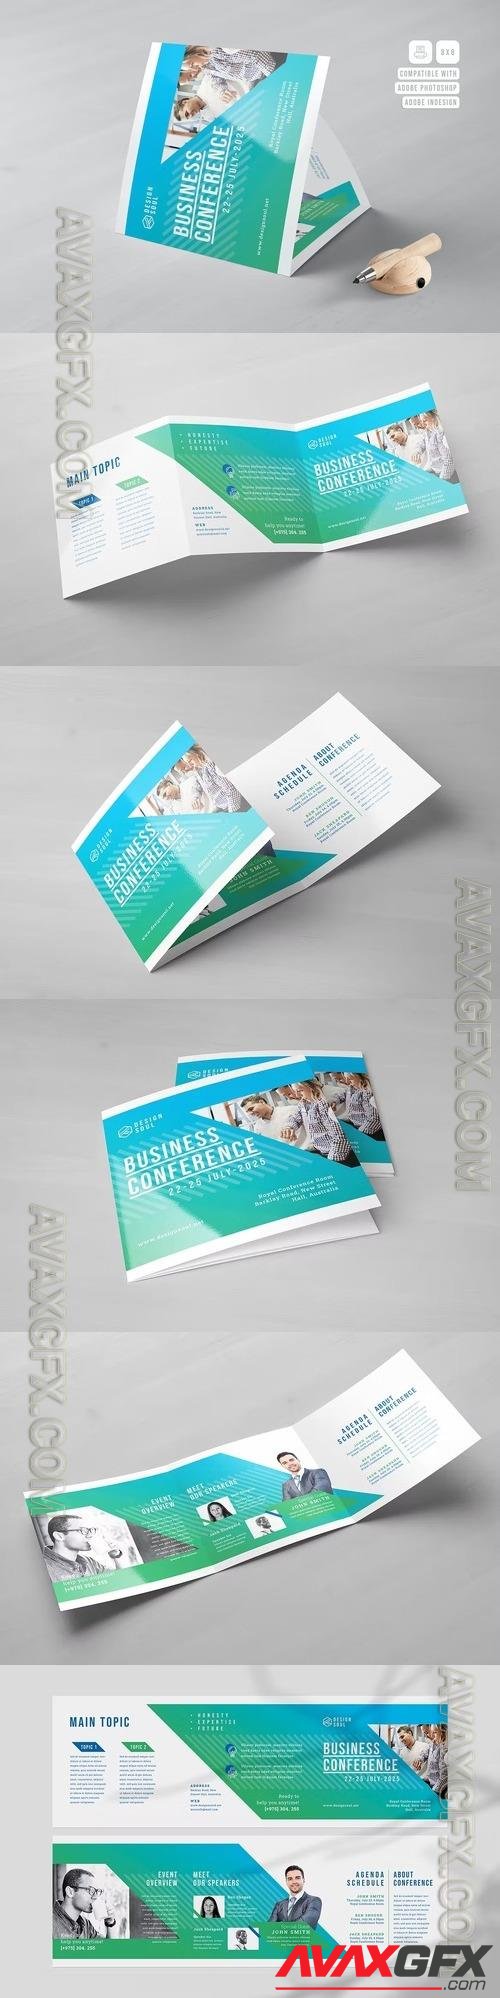 Conference Square Trifold Brochure 4HWJ9SN